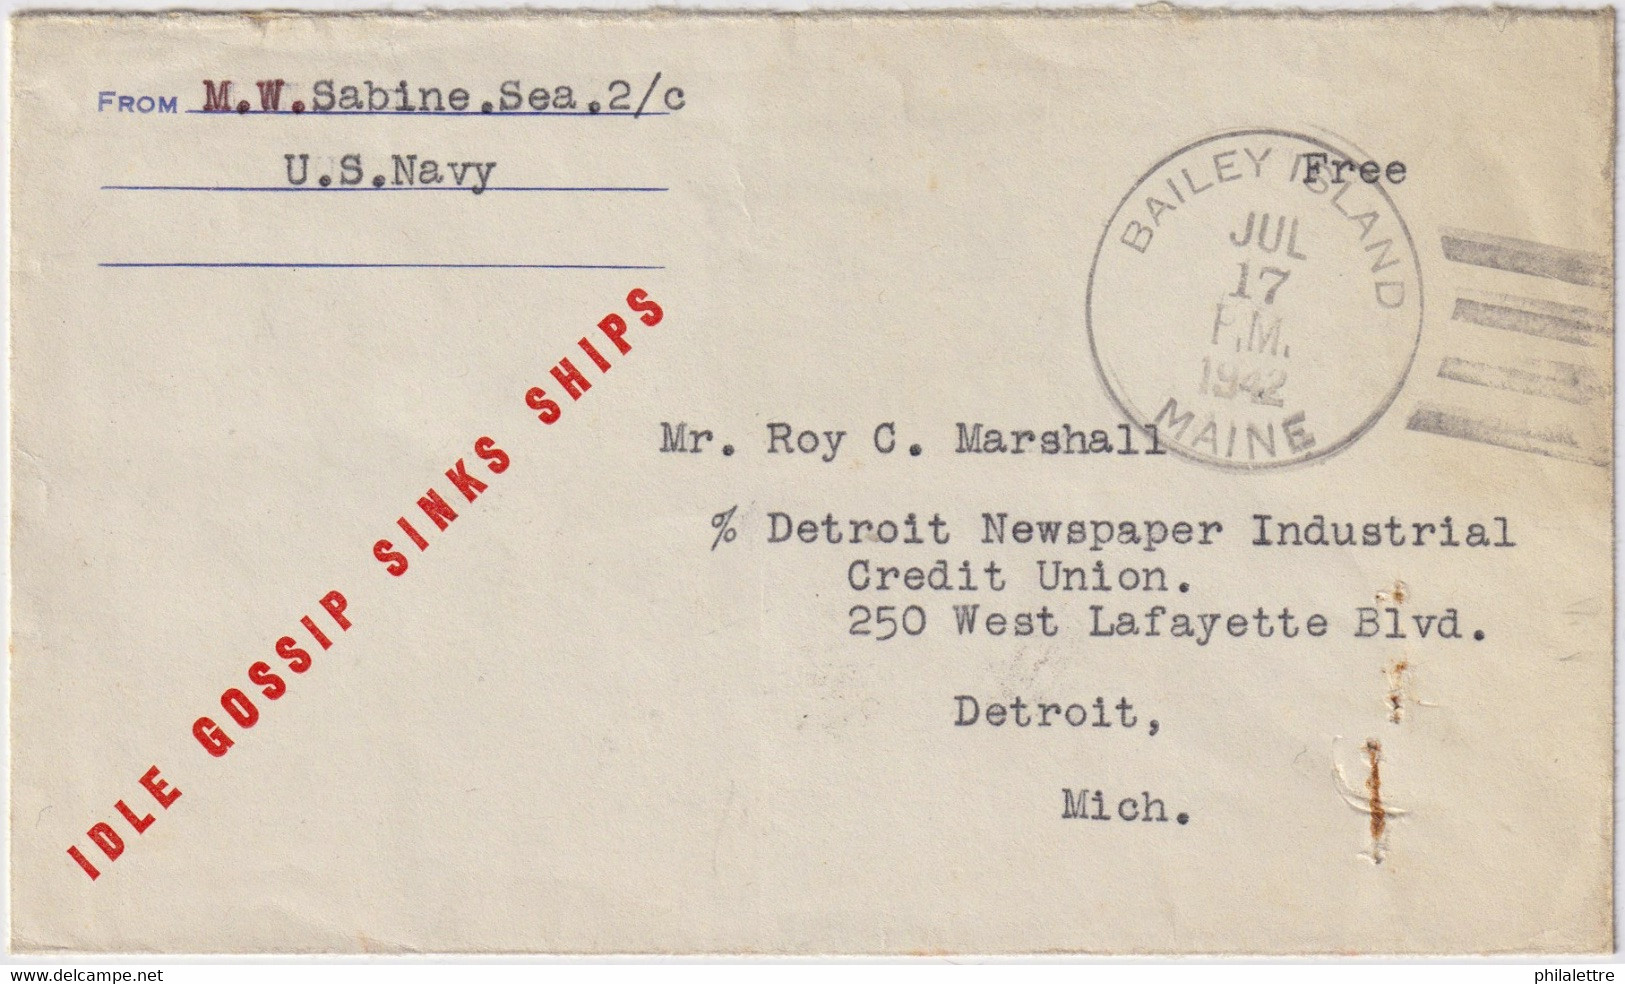 ÉTATS-UNIS / UNITED STATES - 1942 WWII NAVY Sailor's Mail Cover With "IDLE GOSSIP SINKS SHIPS" Slogan From BAILEY ISLAND - Brieven En Documenten